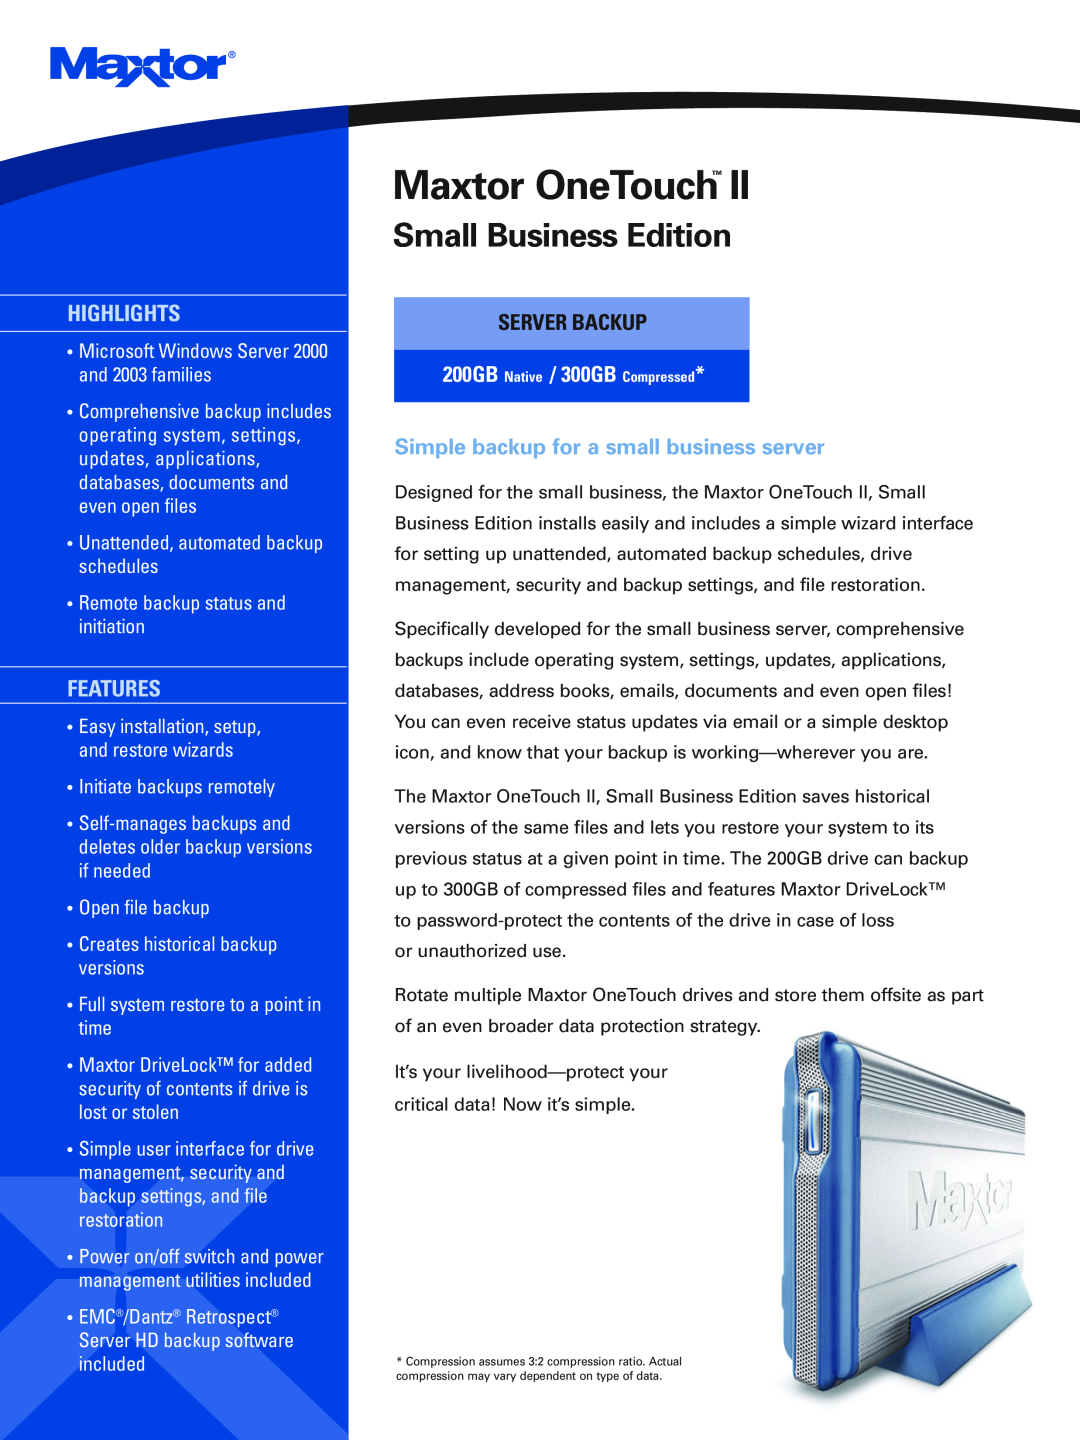 Maxtor Small Business Edition manual Server Backup, Maxtor OneTouch, Highlights, Features, Initiate backups remotely 